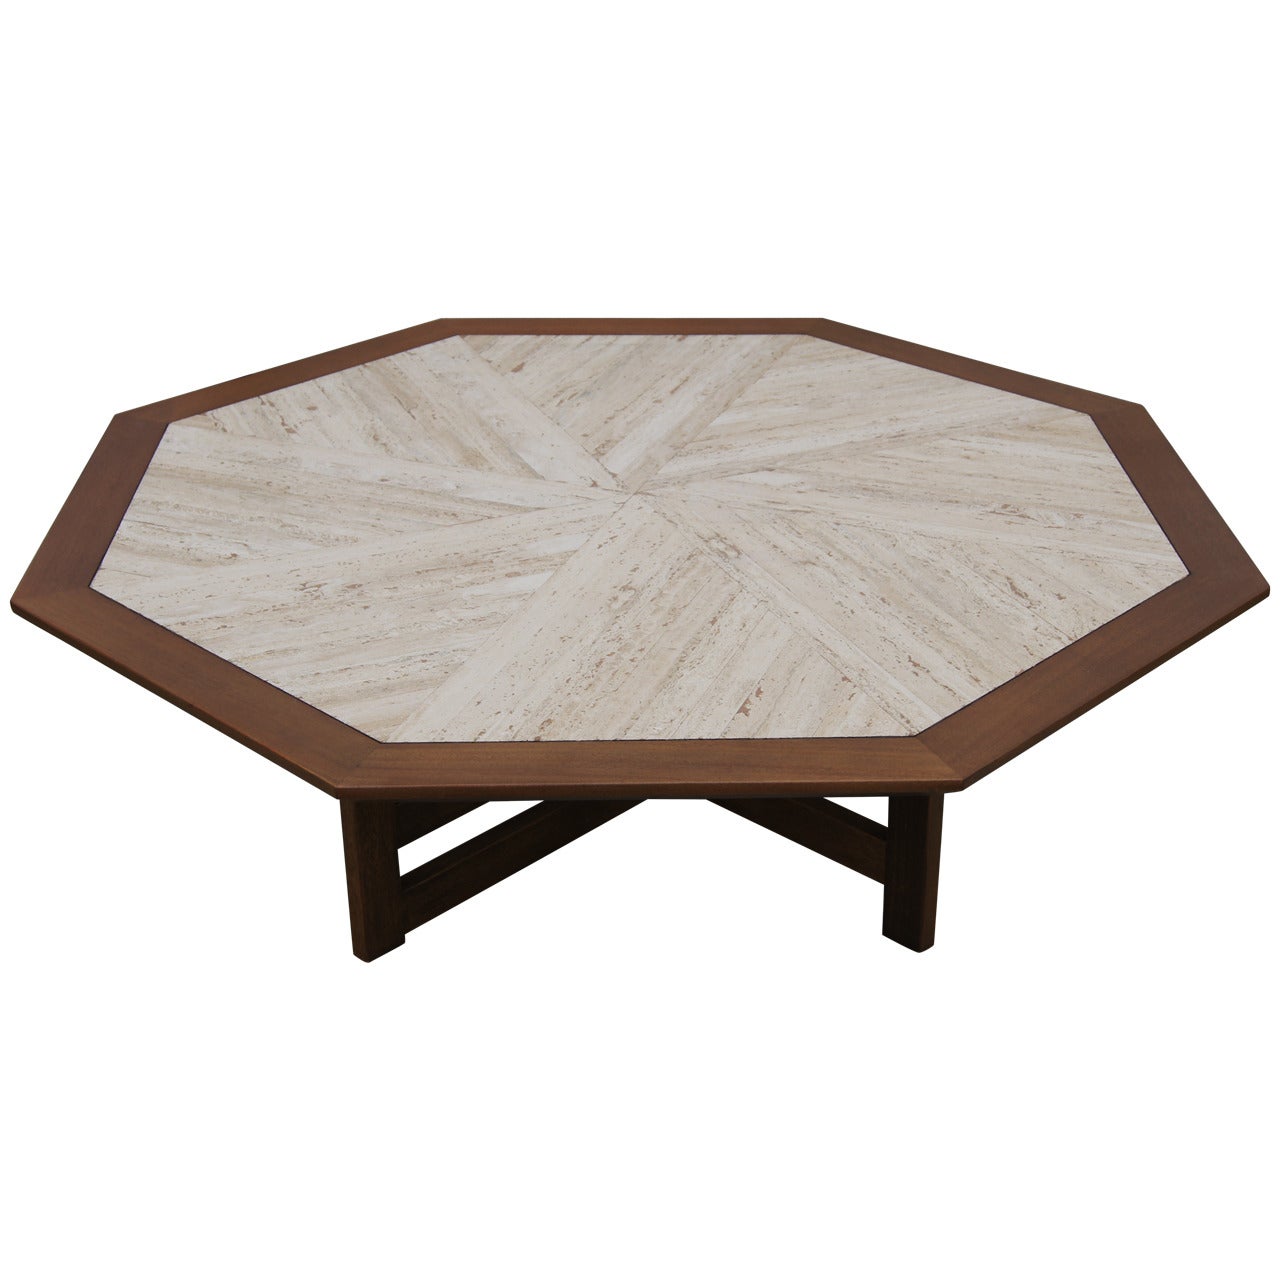 Walnut and Travertine Octagonal Coffee Table by Harvey Probber